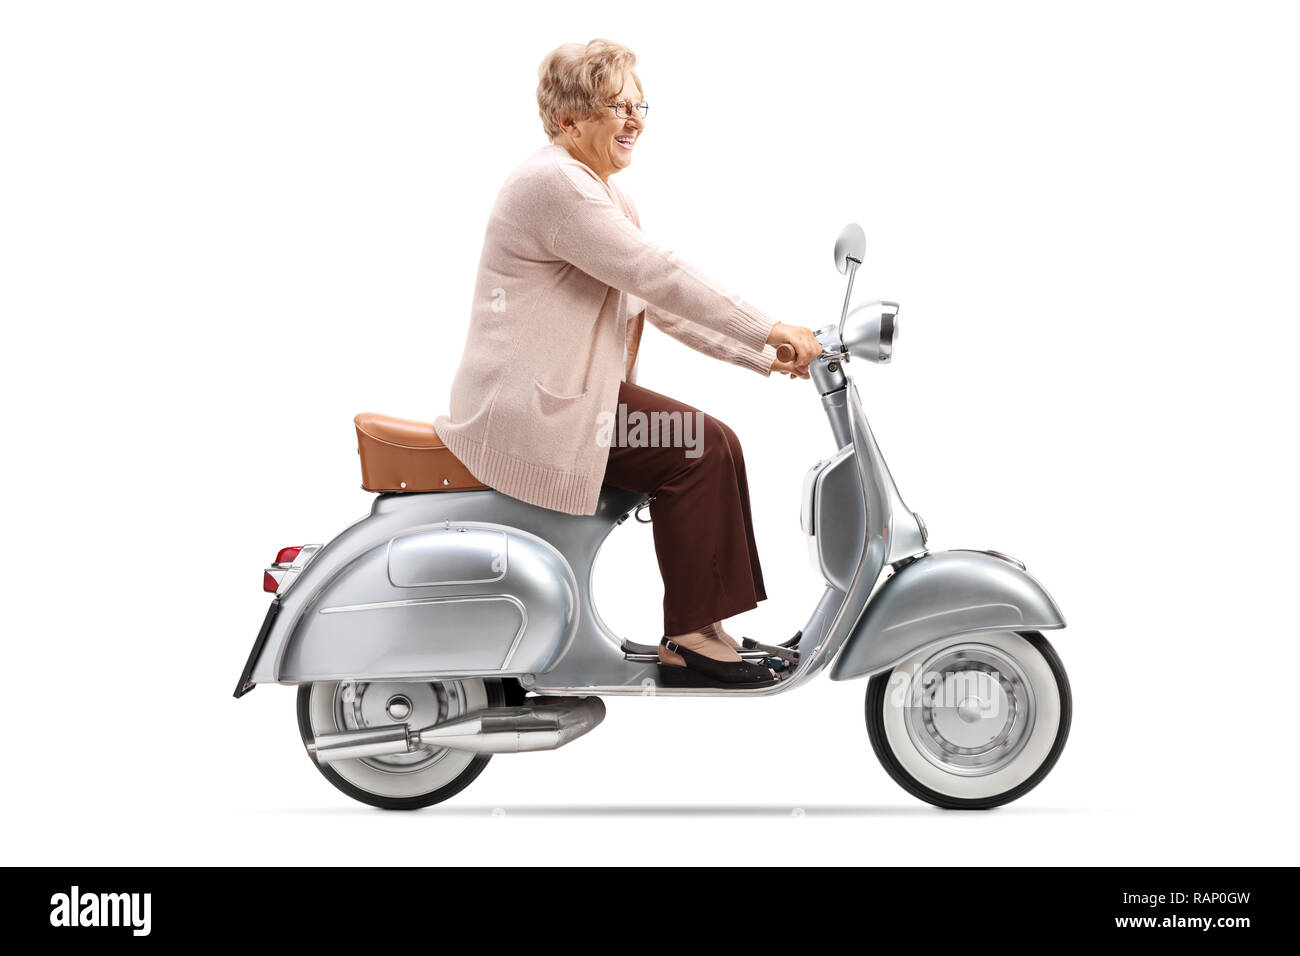 Full length shot of a senior woman riding a vintage scooter isolated on white background Stock Photo